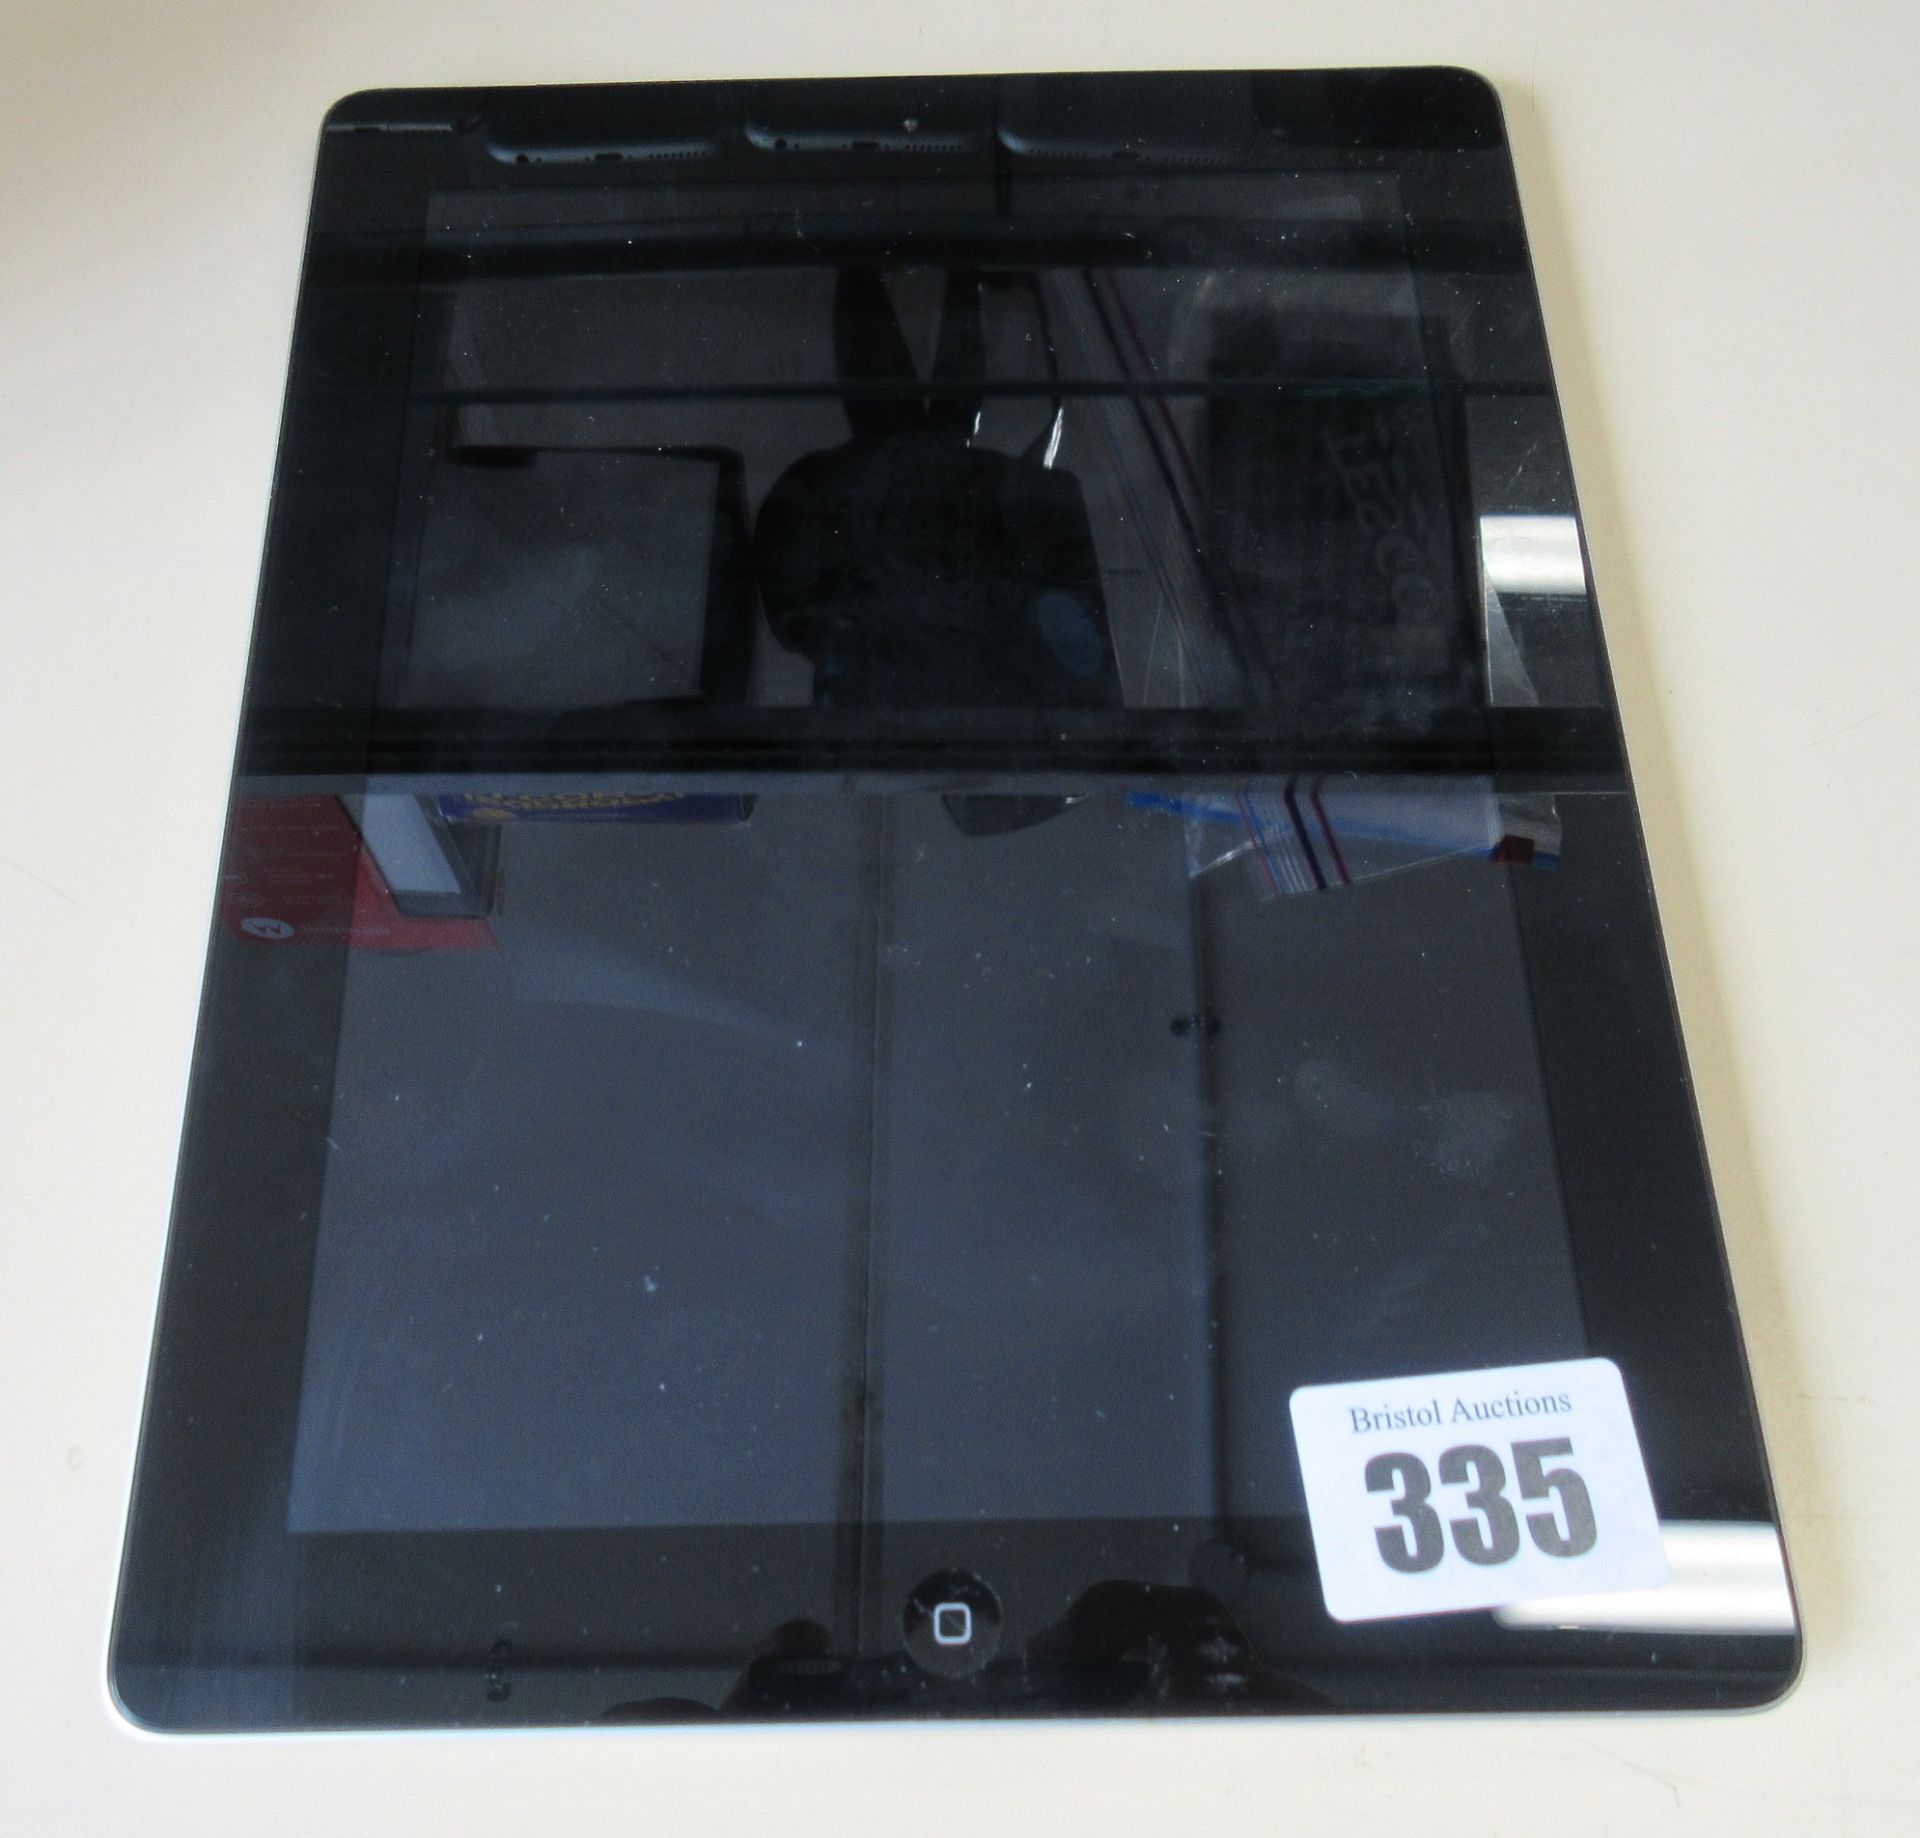 A used Apple iPad 2 16GB Wifi 3G. A1396. MC773LL/A. AT&T. Activation locked. No cables, charger or